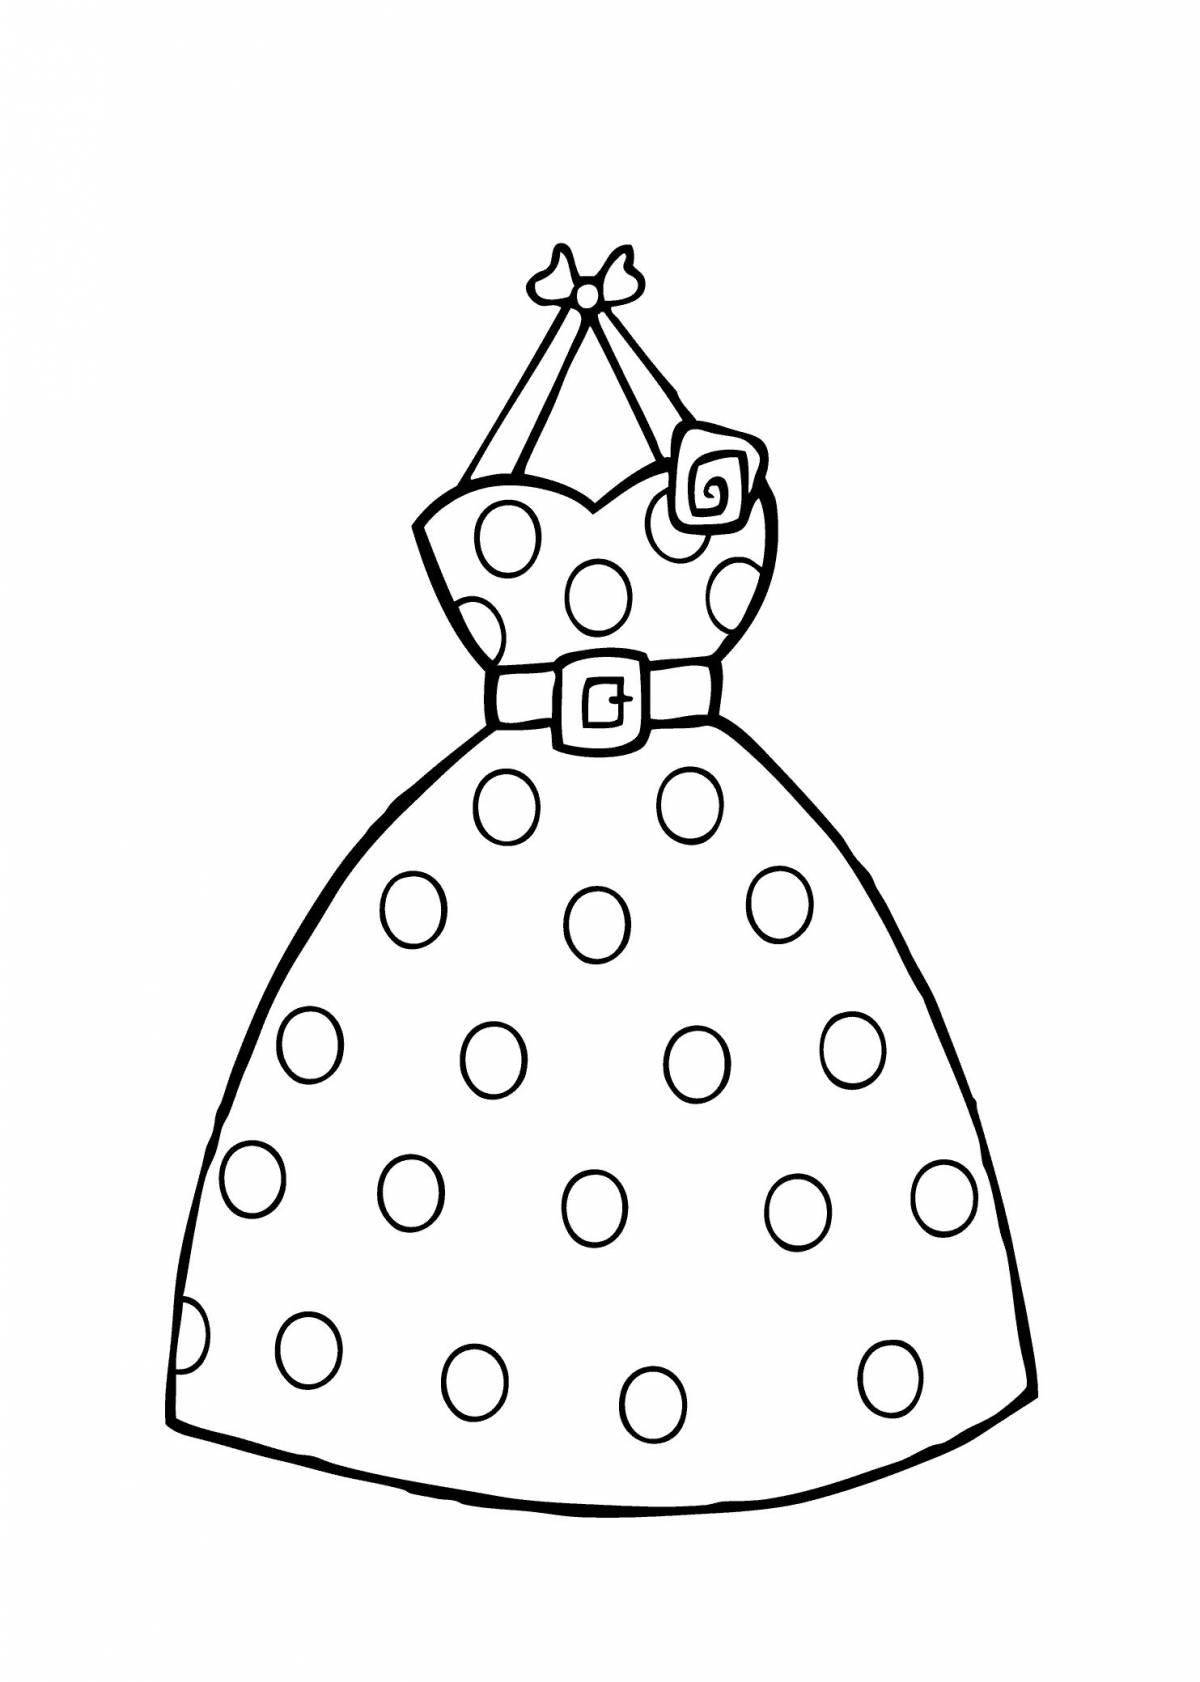 Adorable dress for kids coloring book